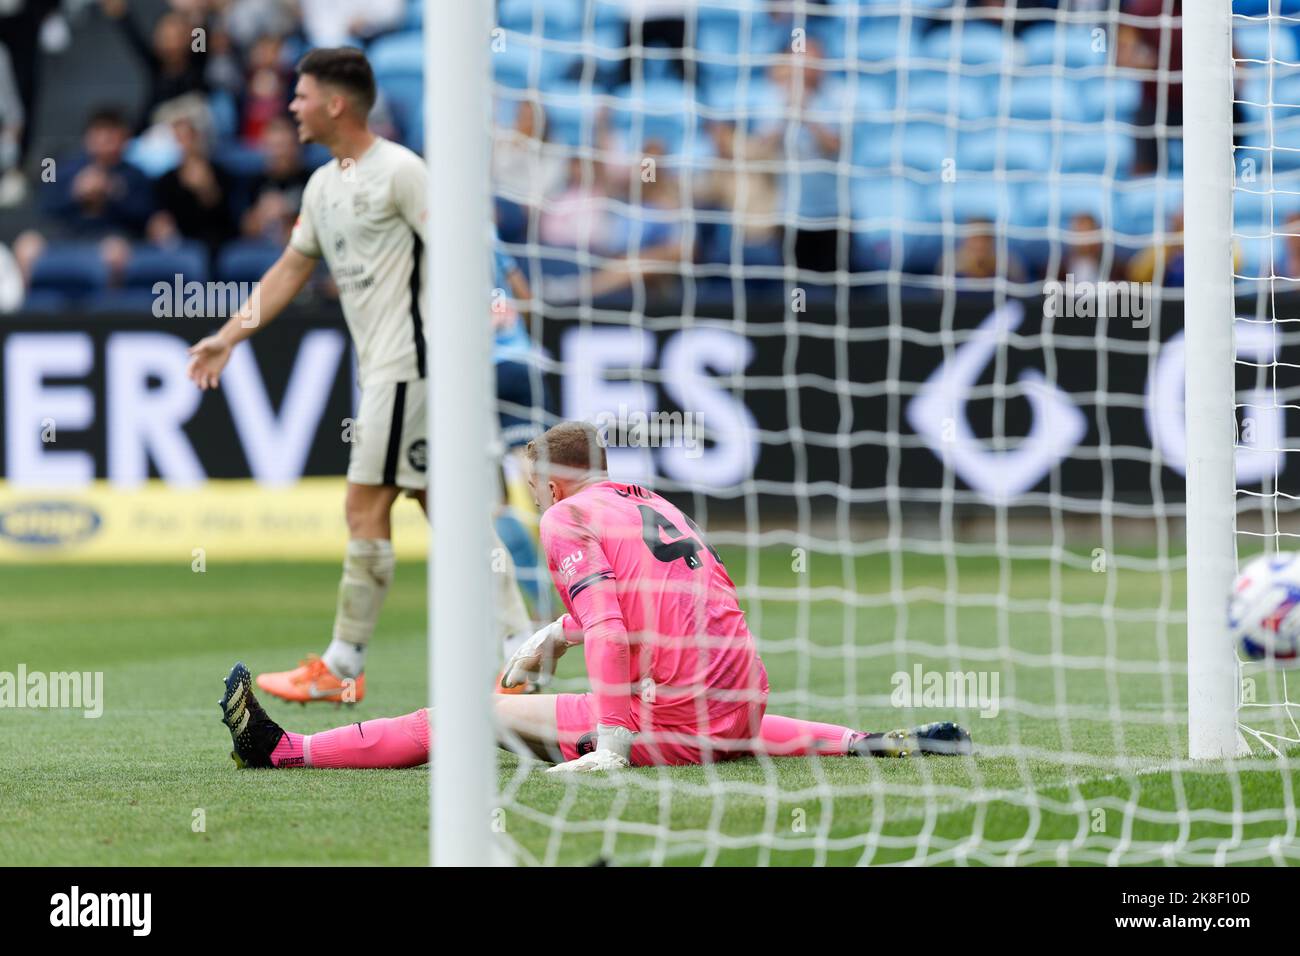 SYDNEY, AUSTRALIA - OCTOBER 23: Joe Gauci of Adelaide United unable to save the goal during the match between Sydney FC and Adelaide United at Allianz Stadium on October 23, 2022 in Sydney, Australia Credit: IOIO IMAGES/Alamy Live News Stock Photo